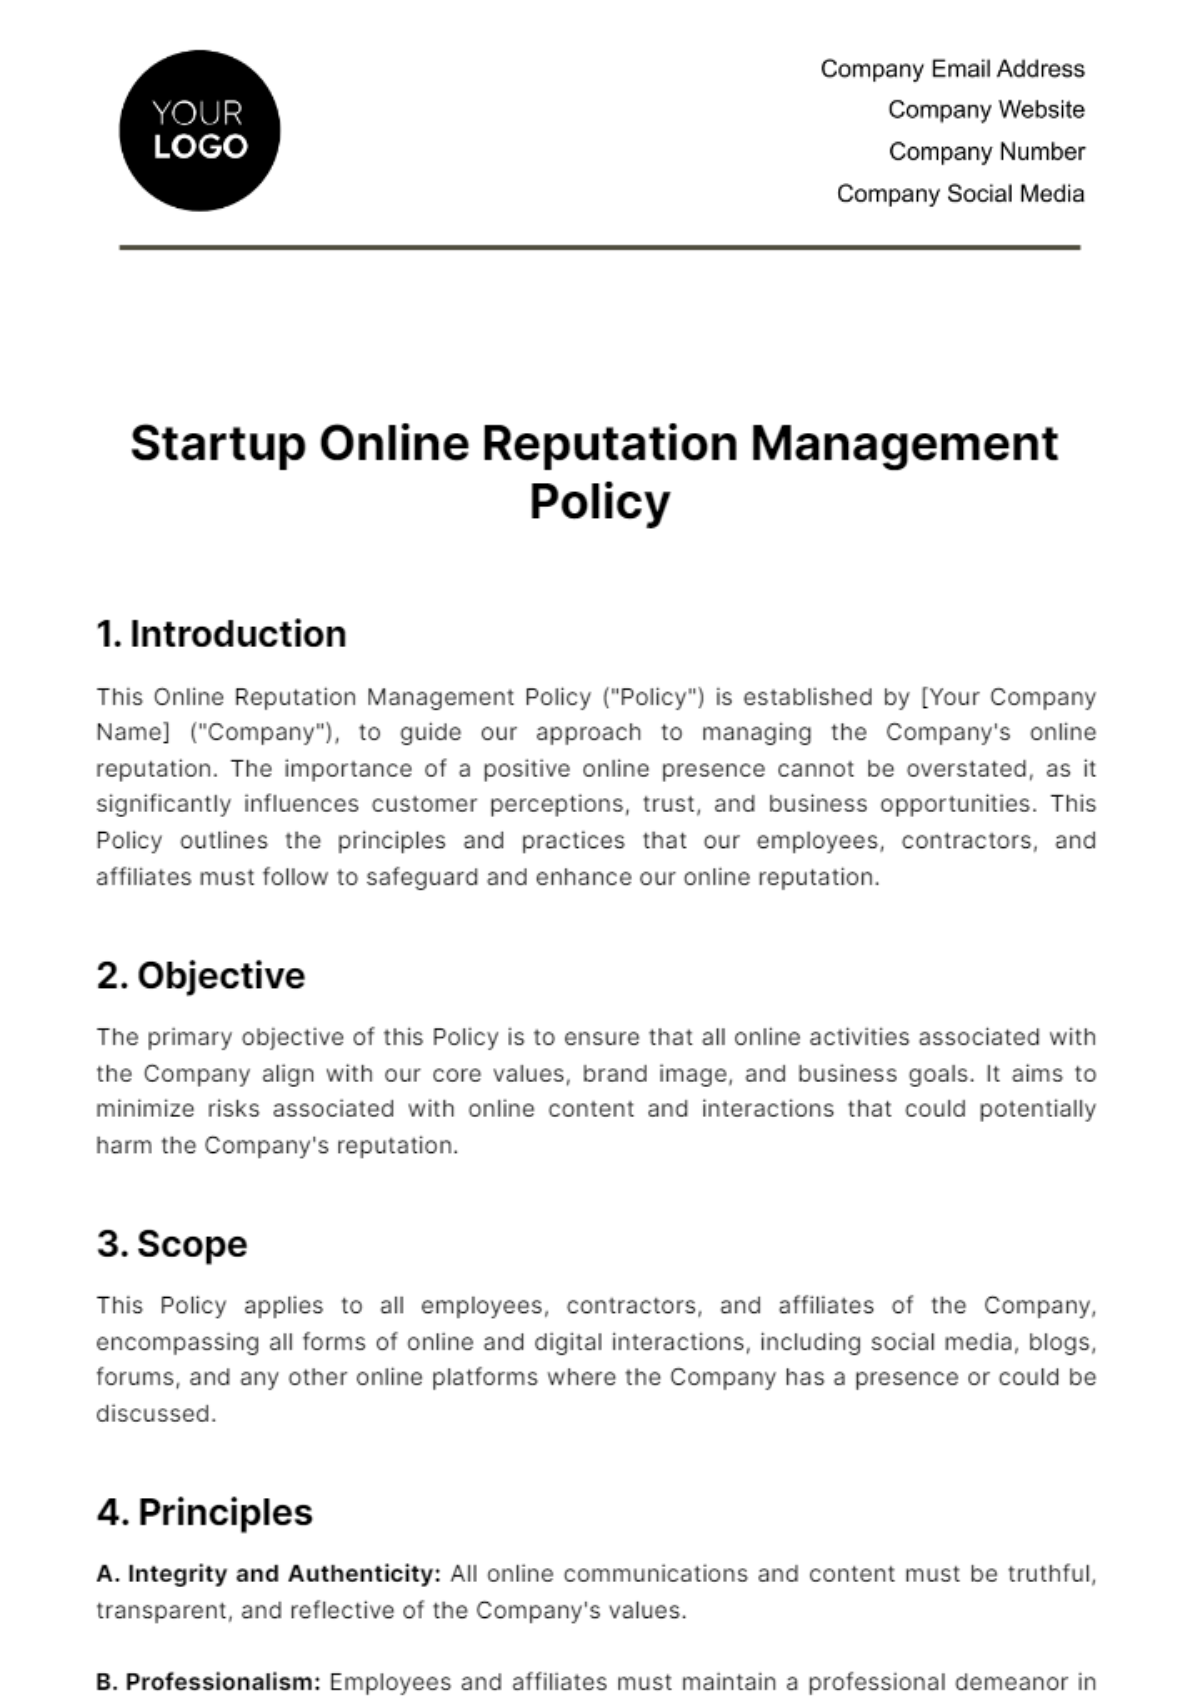 Free Startup Online Reputation Management Policy Template